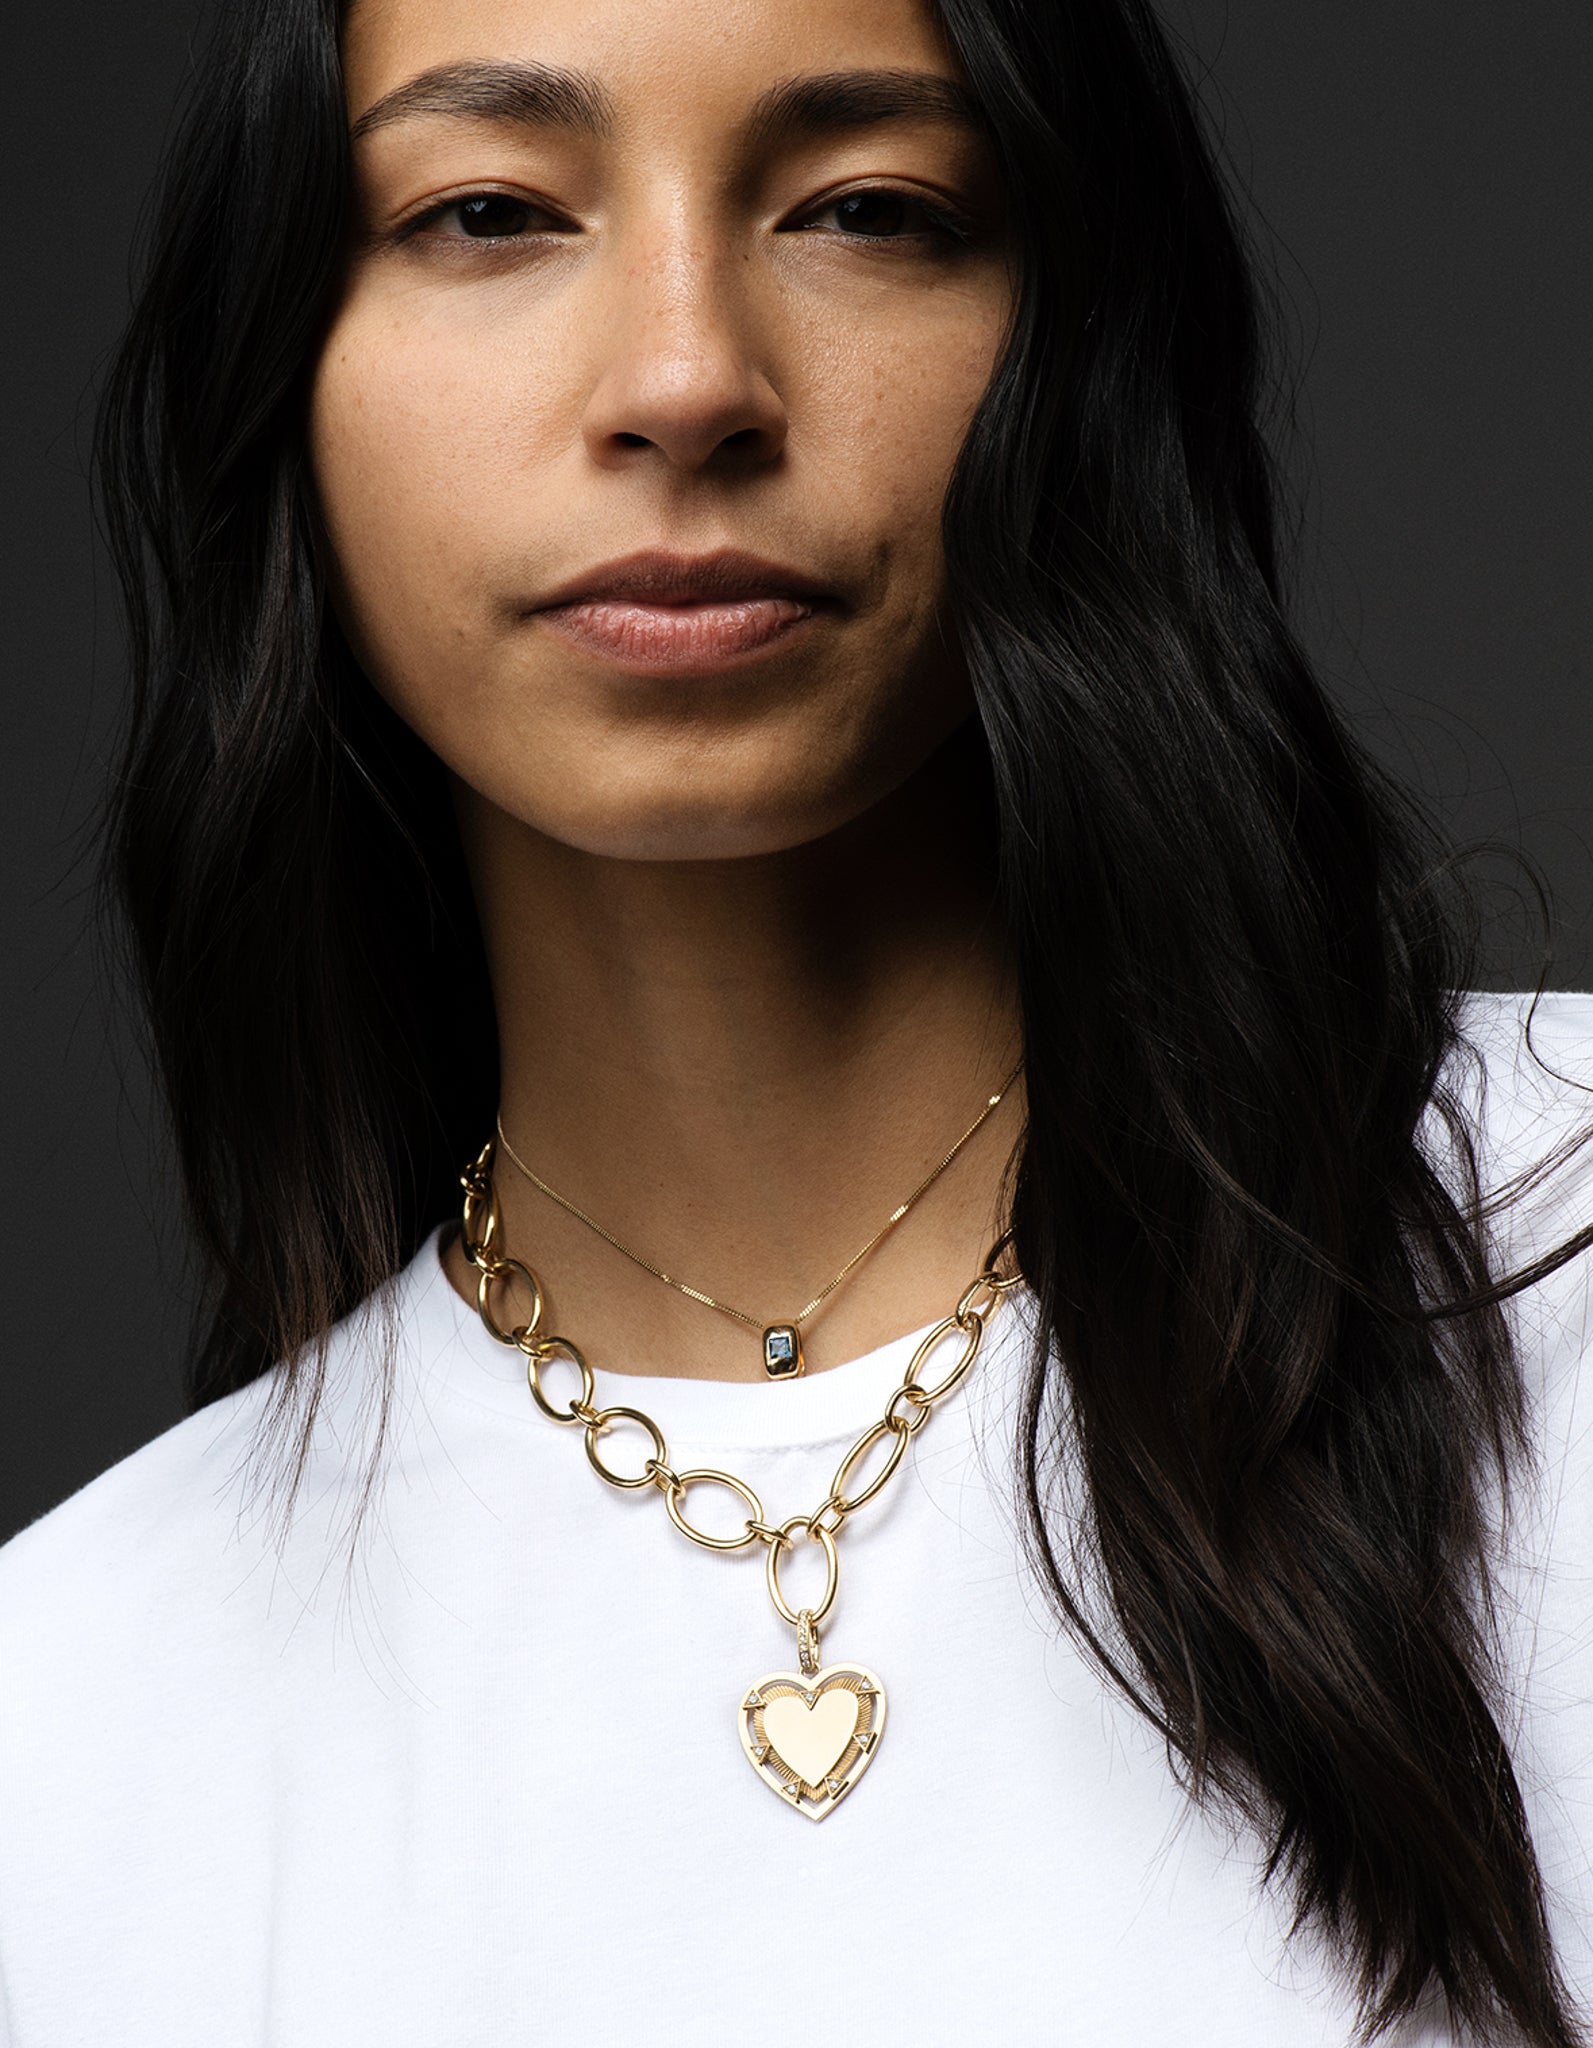 Heart Token - Love : Oval Link Chain Necklace